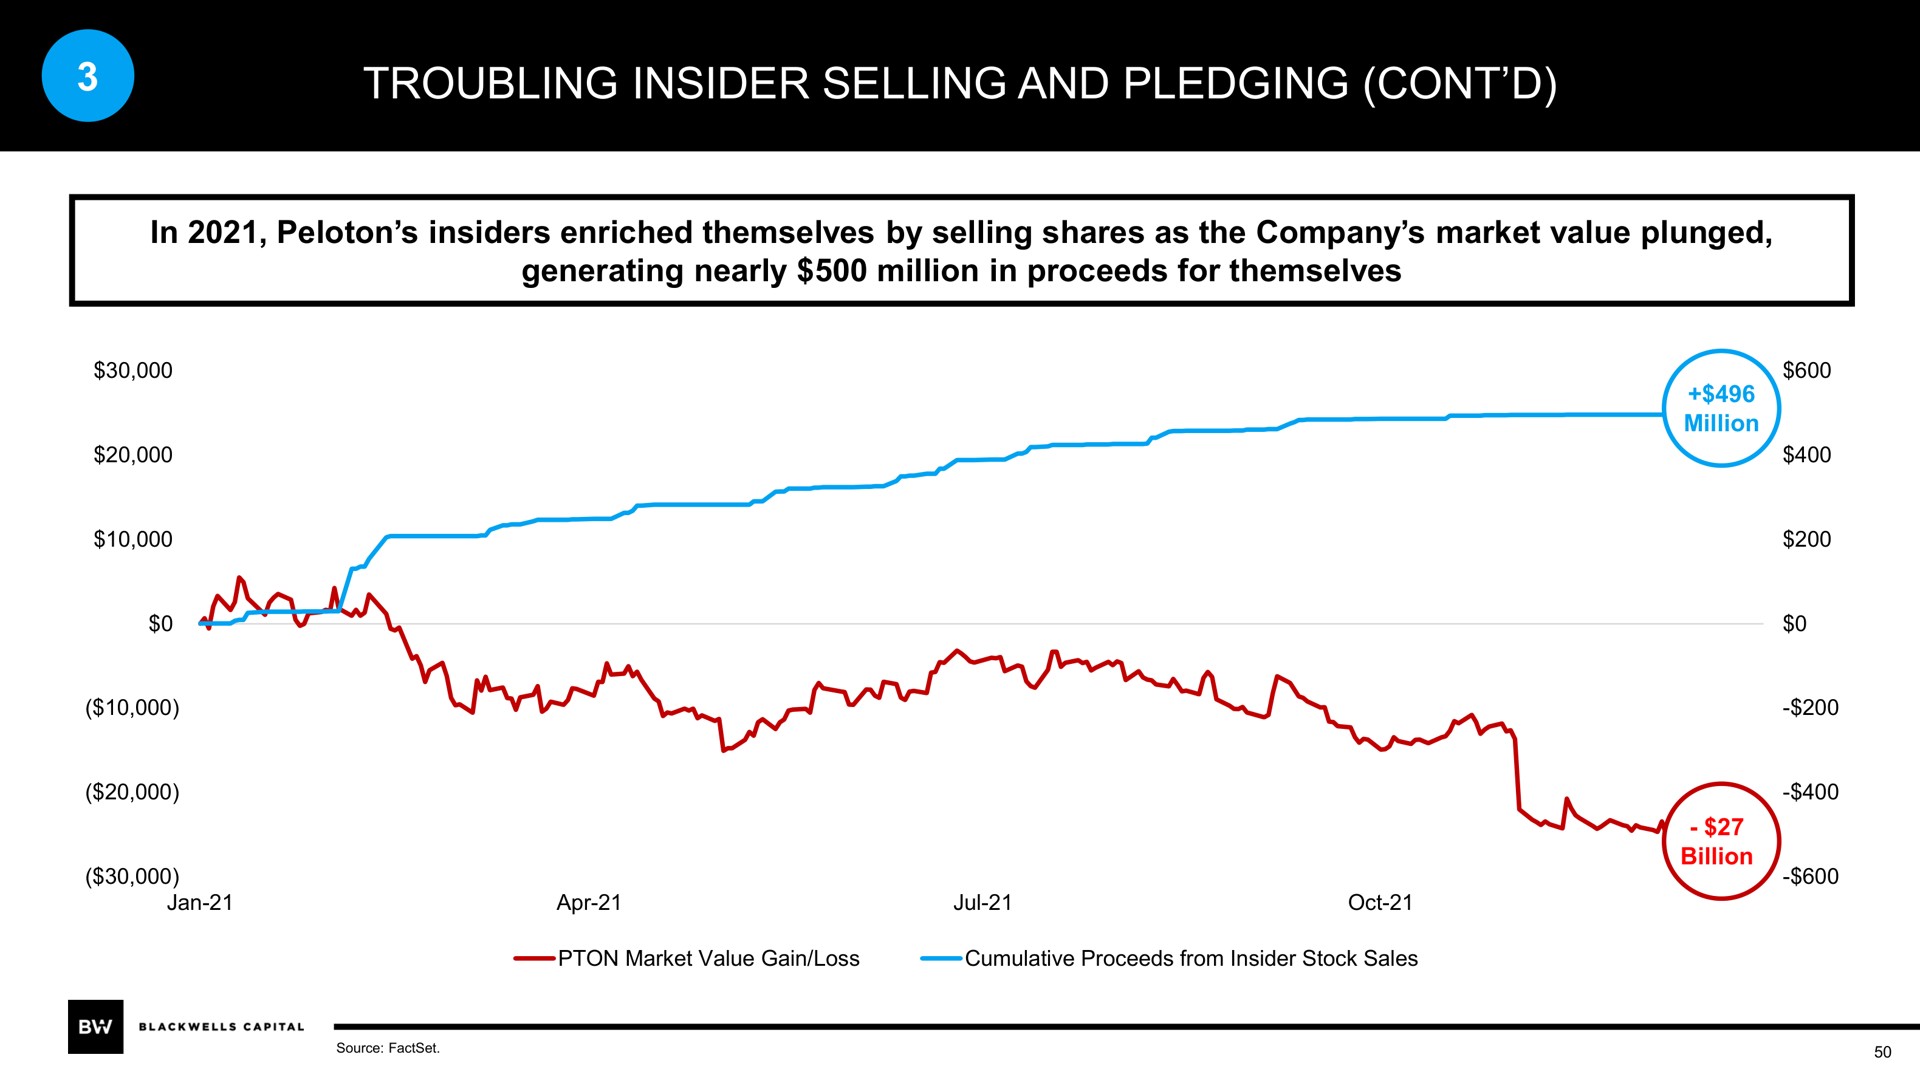 troubling insider selling and pledging | Blackwells Capital